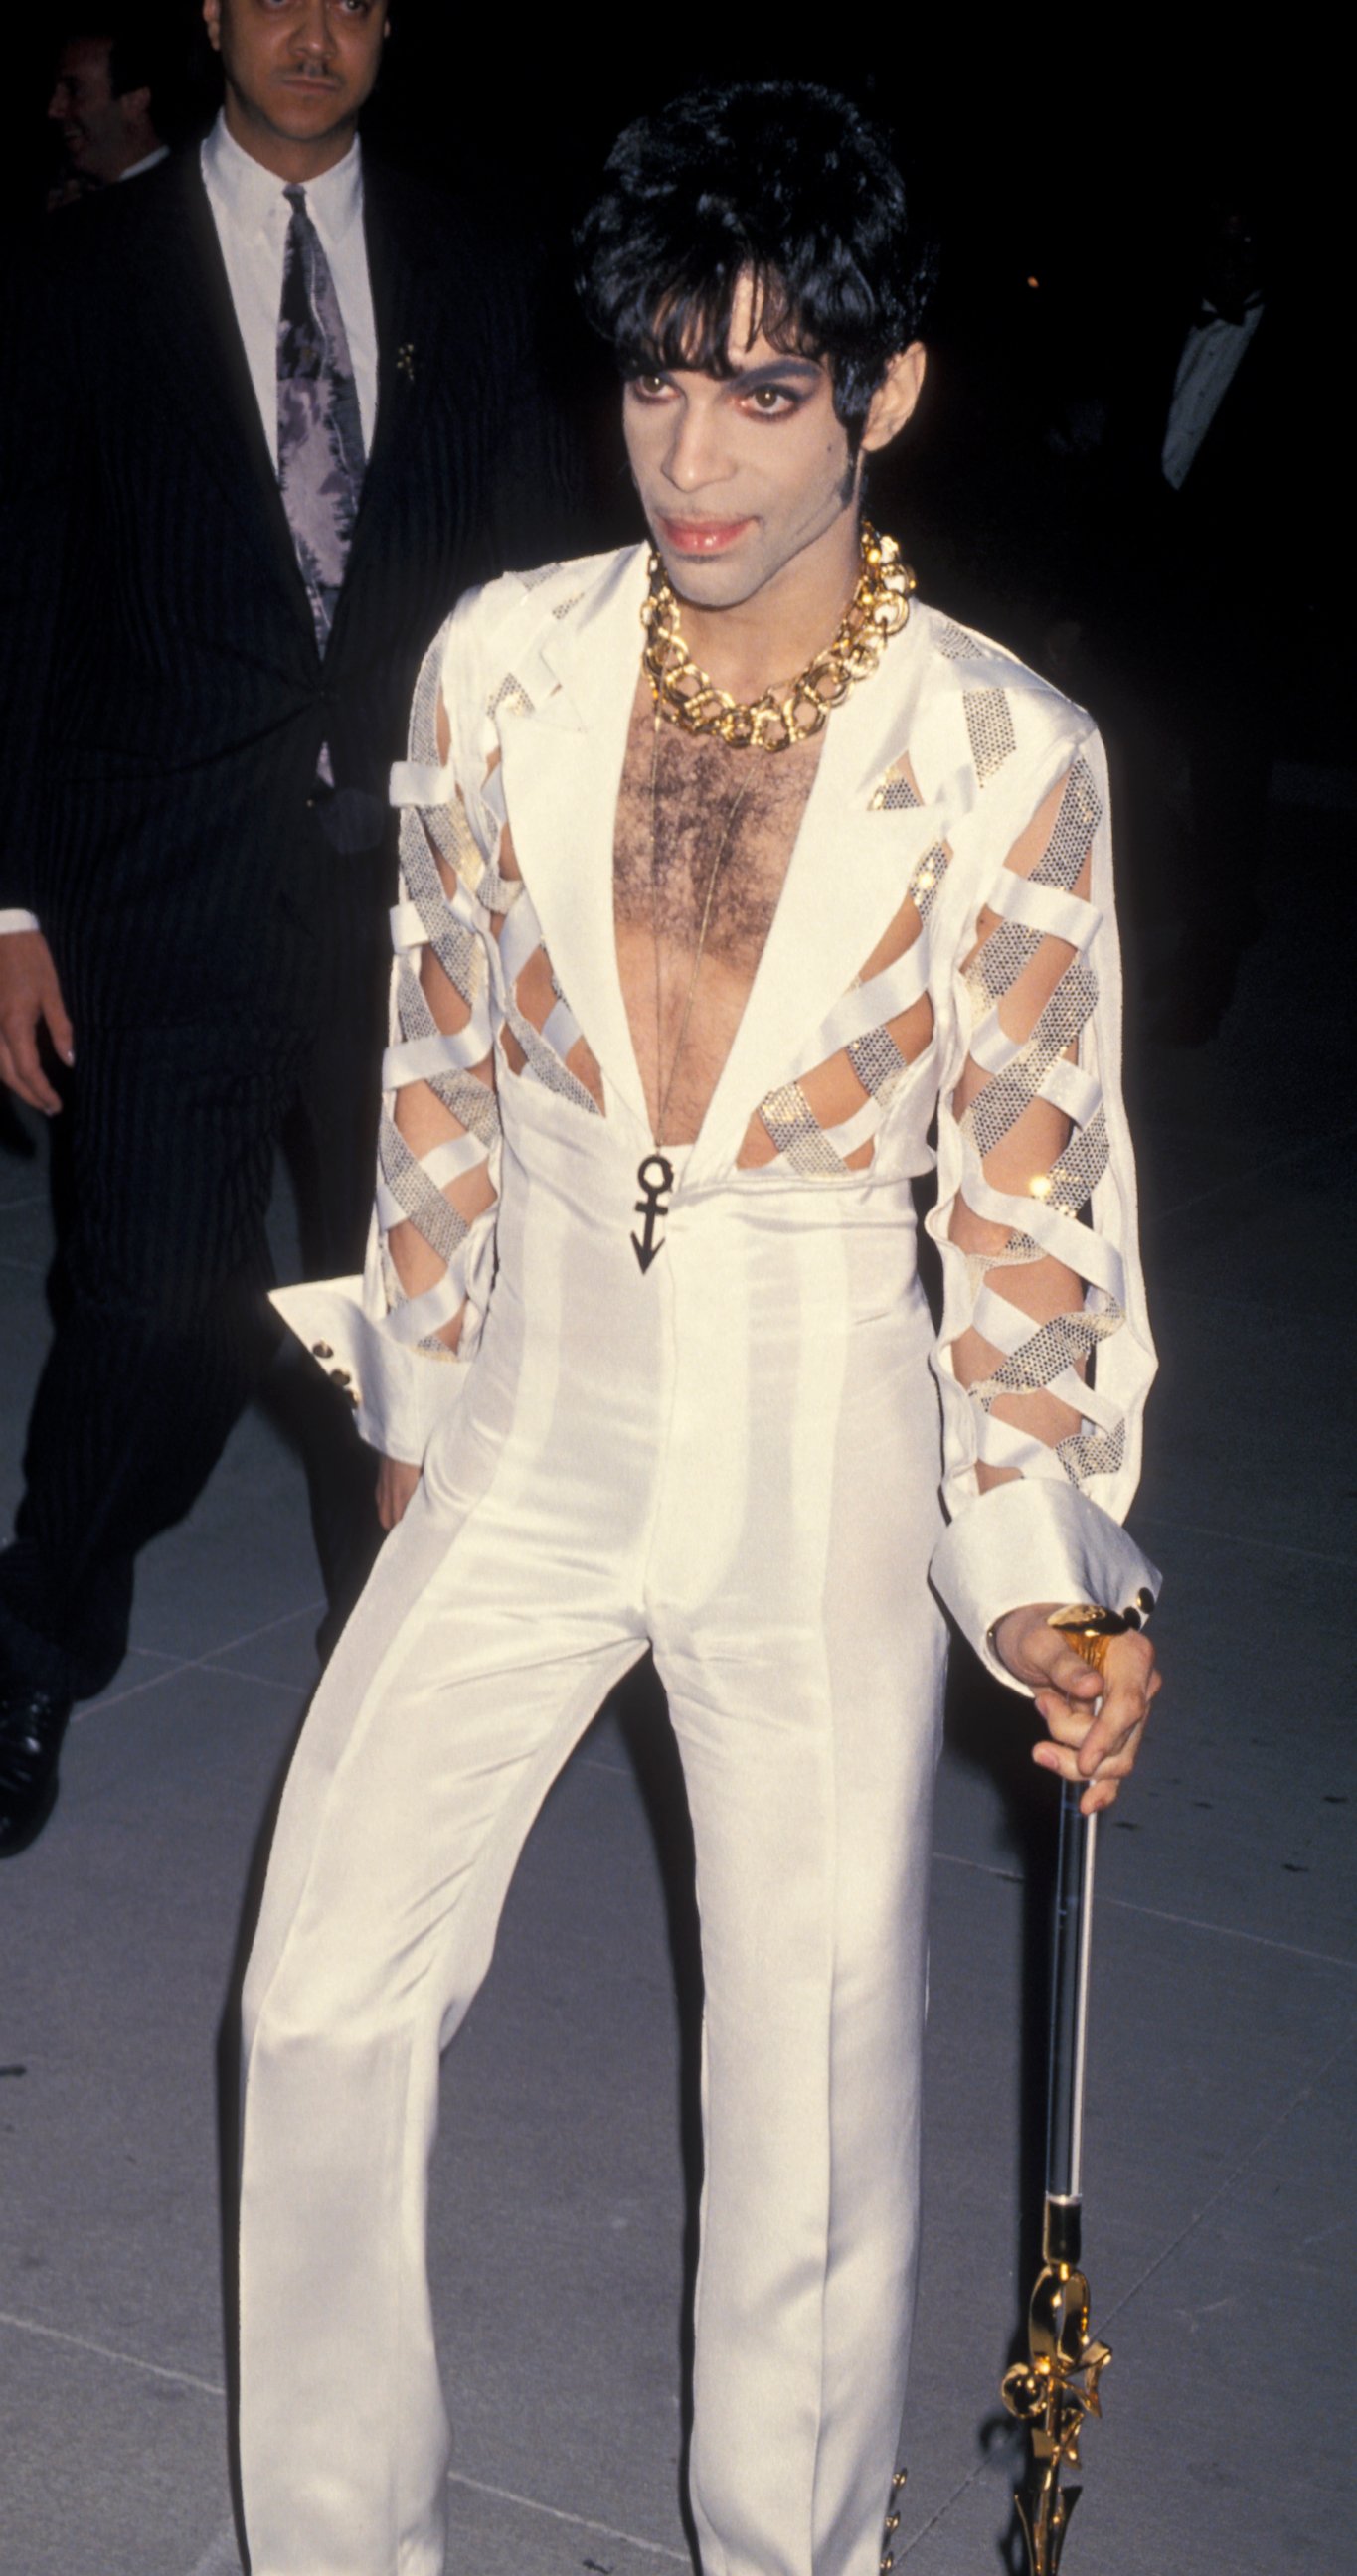 PHOTO: Prince attending First Annual Vanity Fair Oscar Party, March 21, 1994, at Morton's Restaurant in West Hollywood, California.